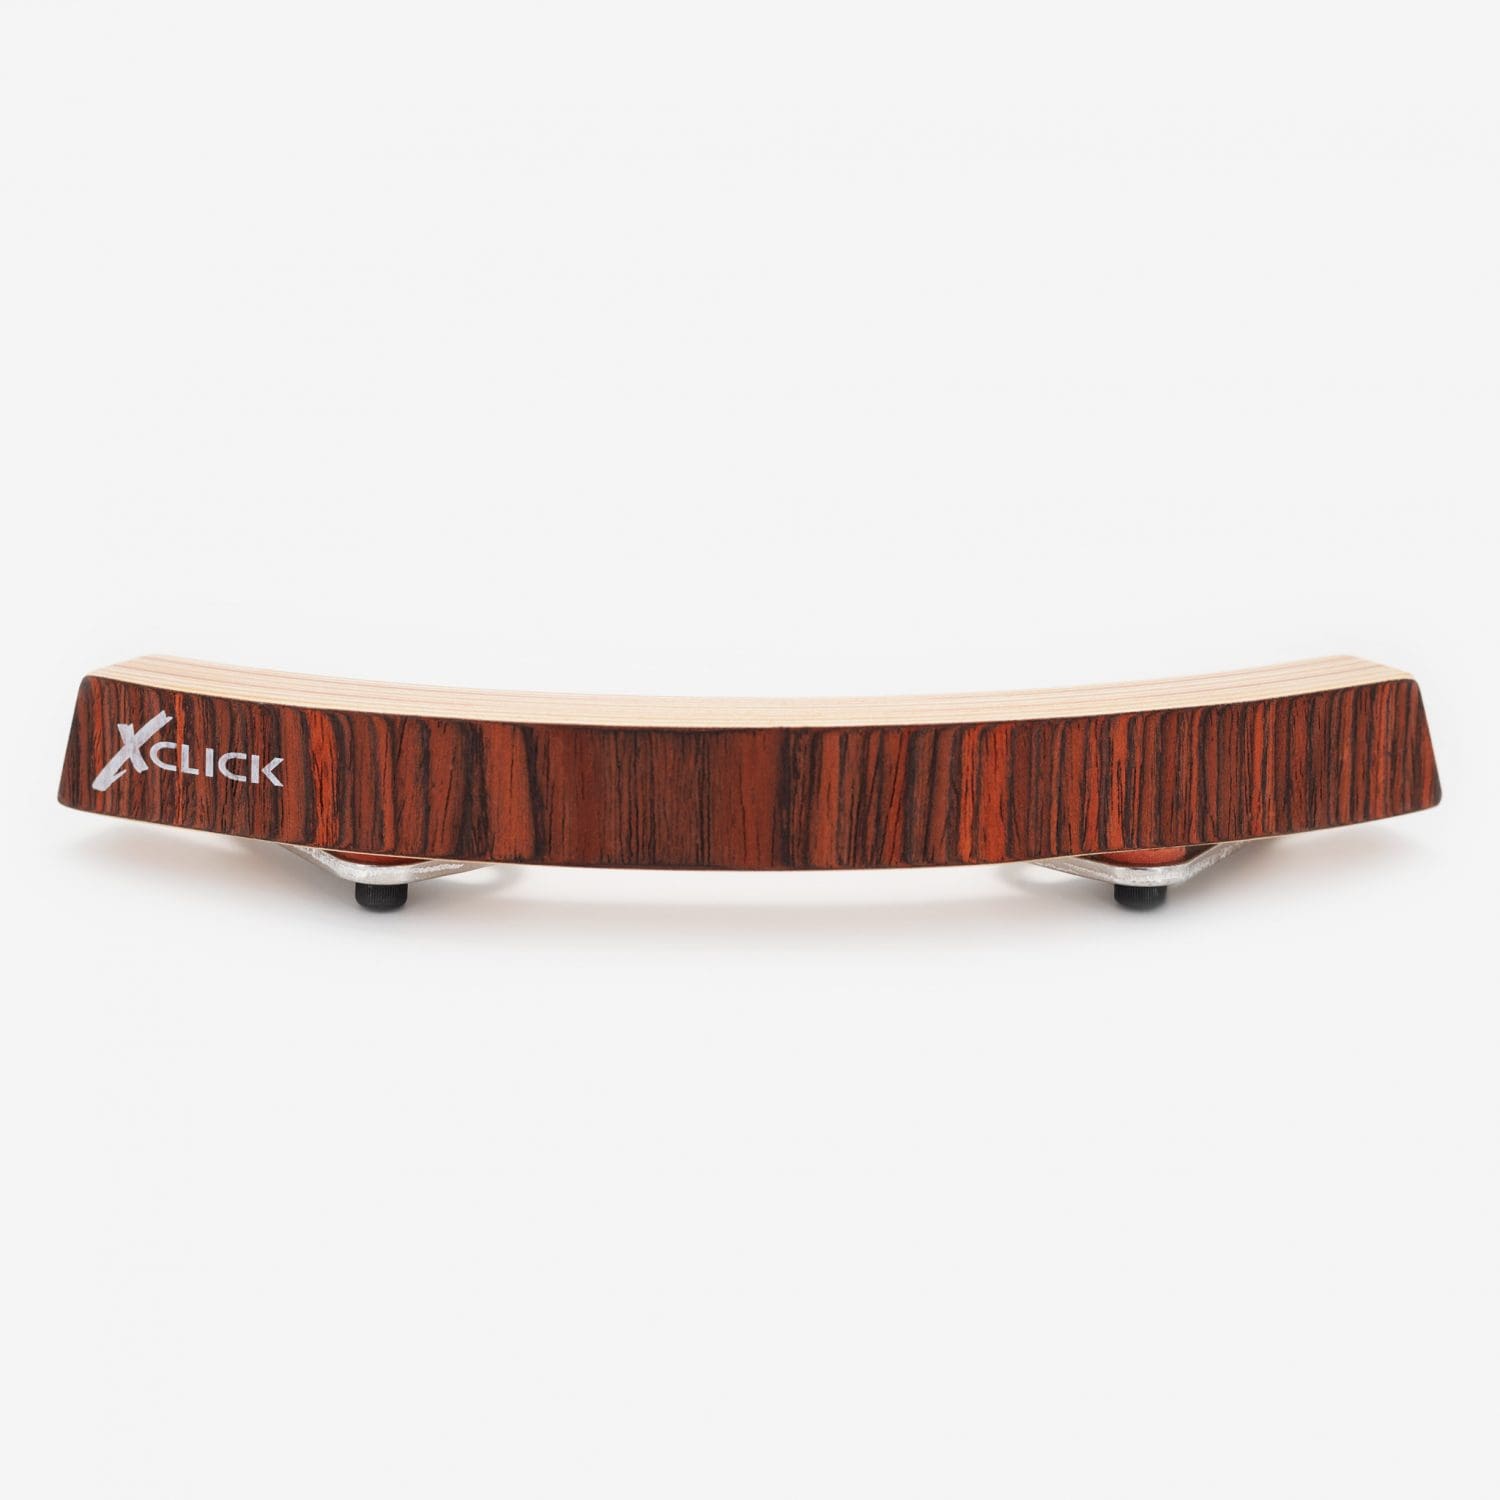 X-Click Limited Edition Rosewood Cross-Stick Enhancer